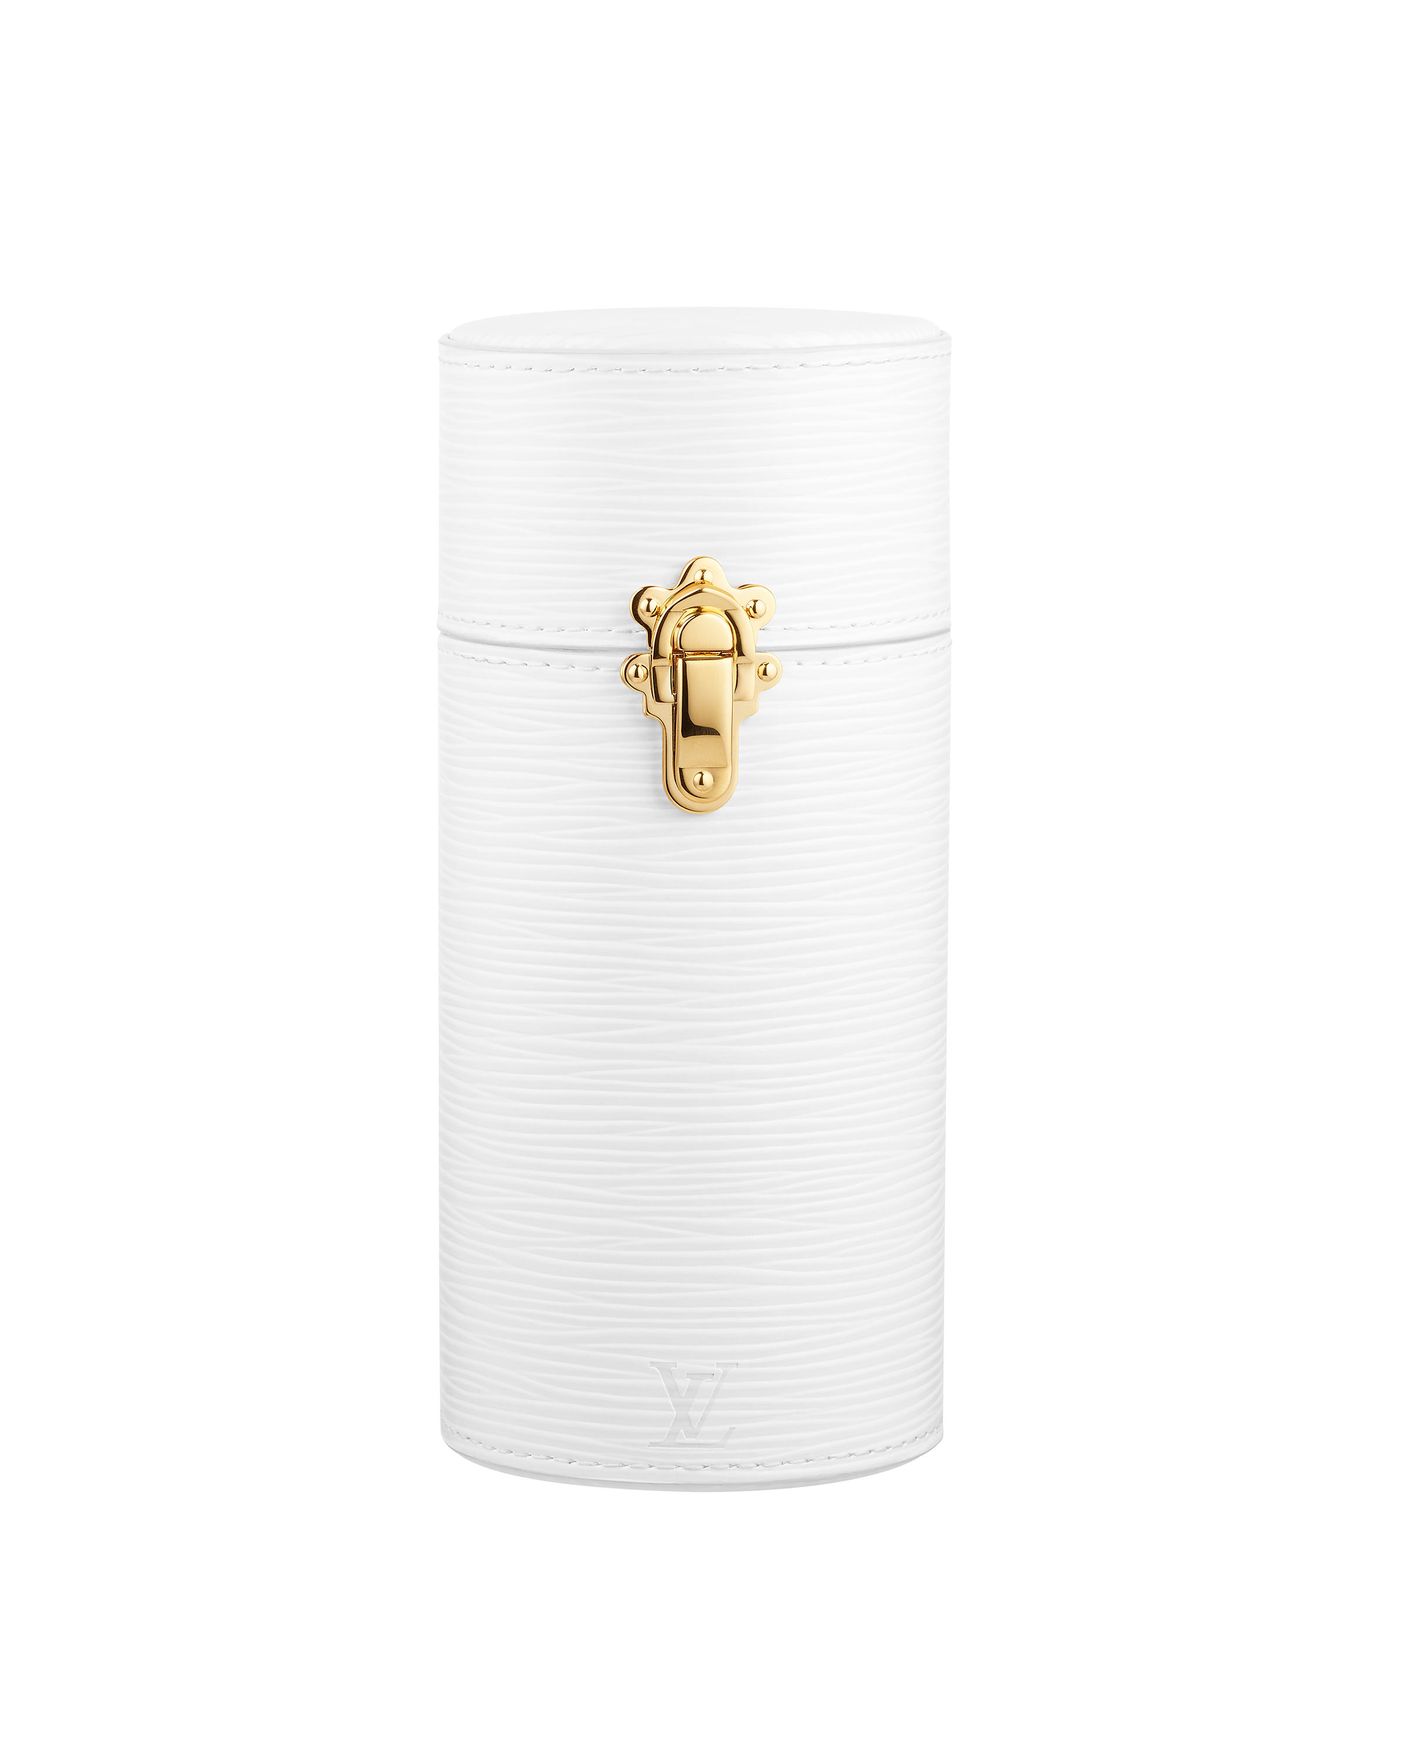 Louis Vuitton launches travel cases for your perfume